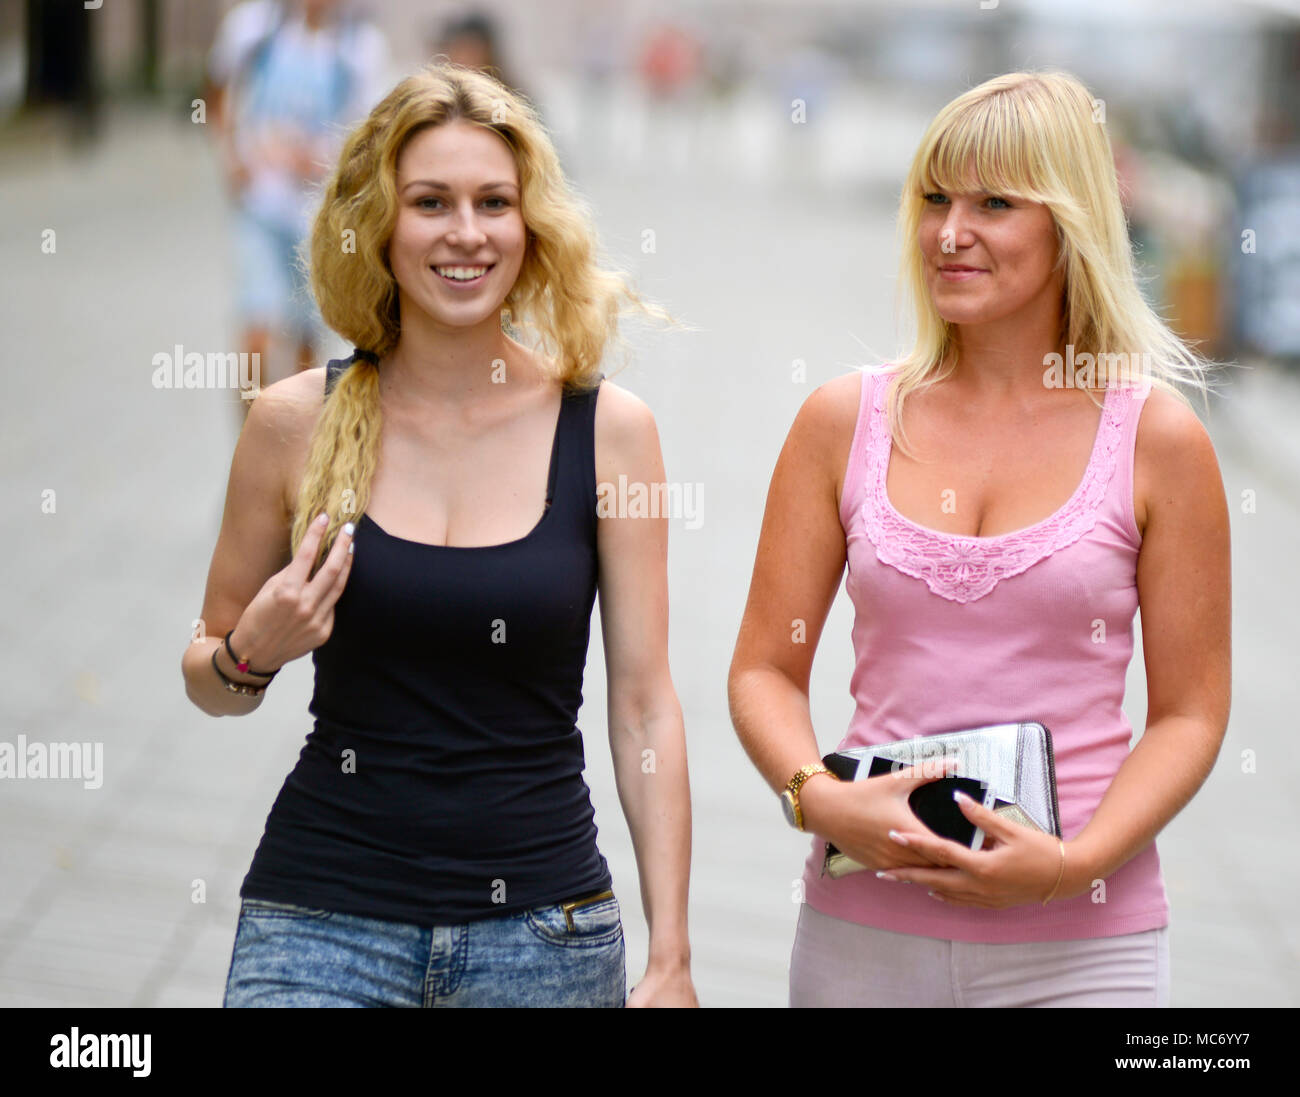 Mother and daughter in Laisves Avenue, Kaunas, Lithuania Stock Photo